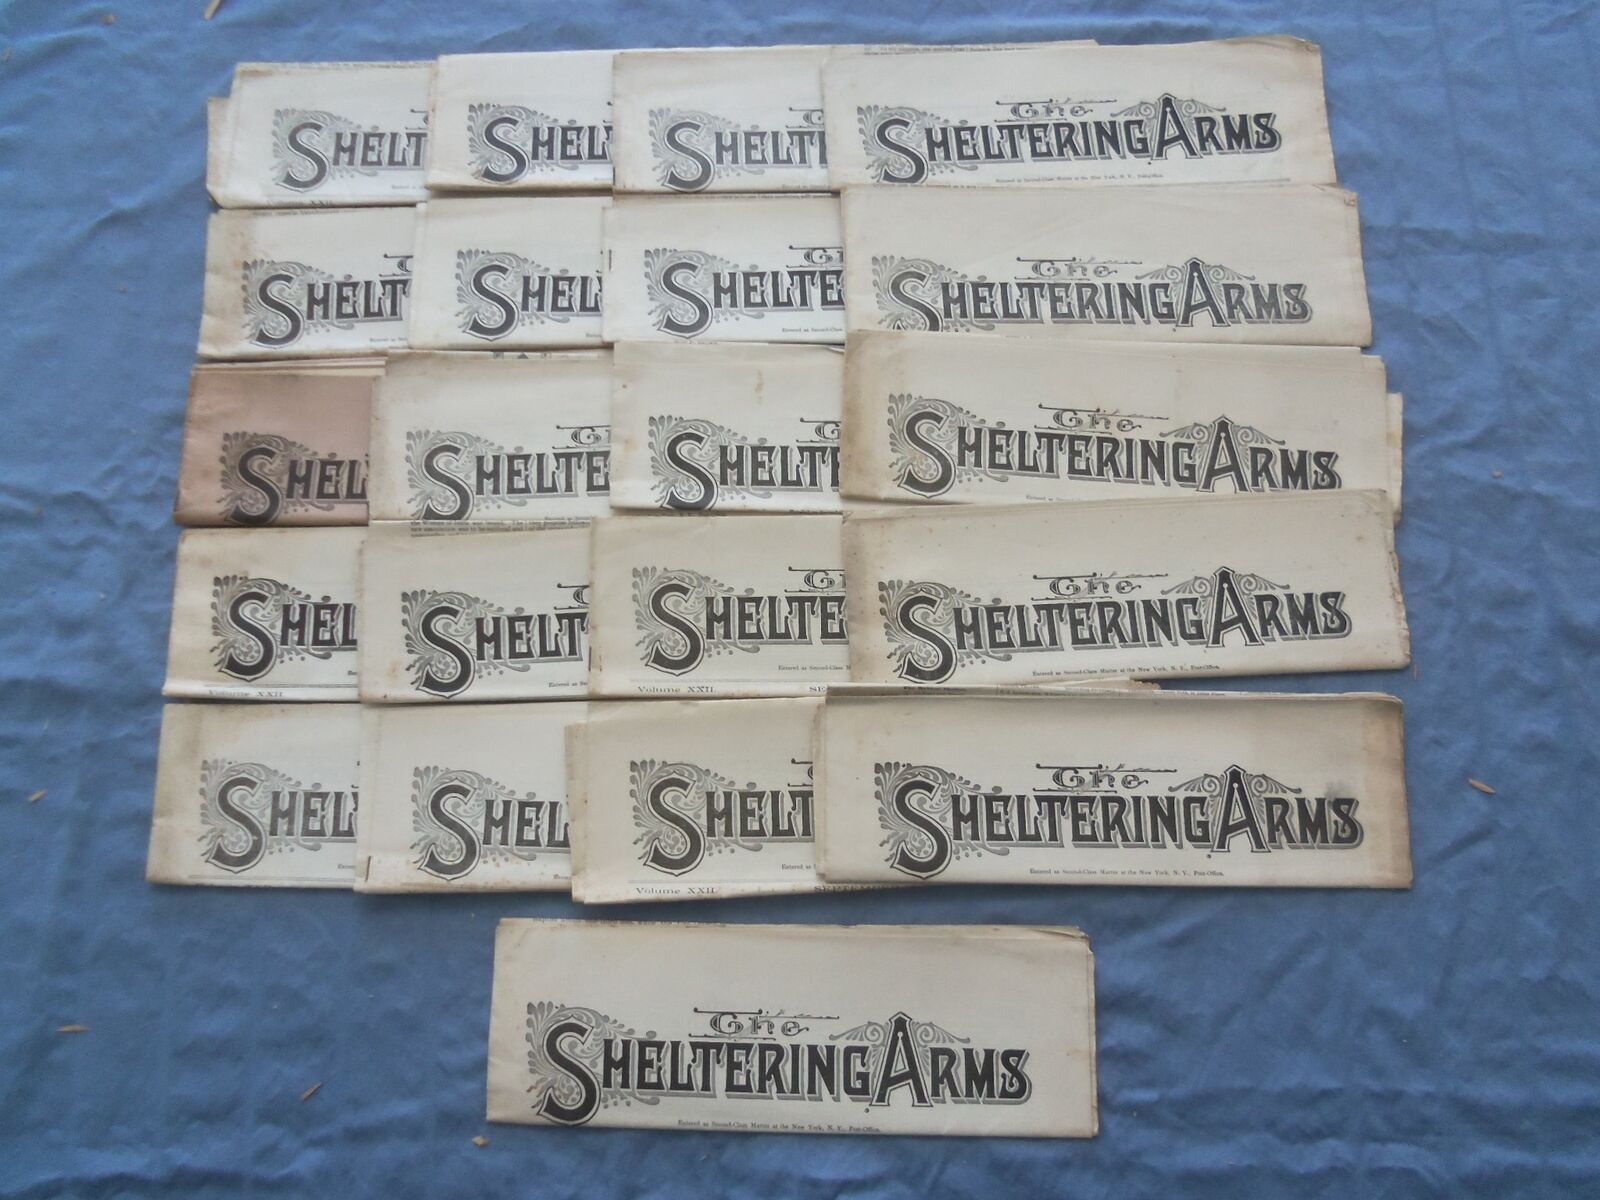 1889 THE SHELTERING ARMS NEWSPAPER - LOT OF 21 - #S 22-42 - NP 8424